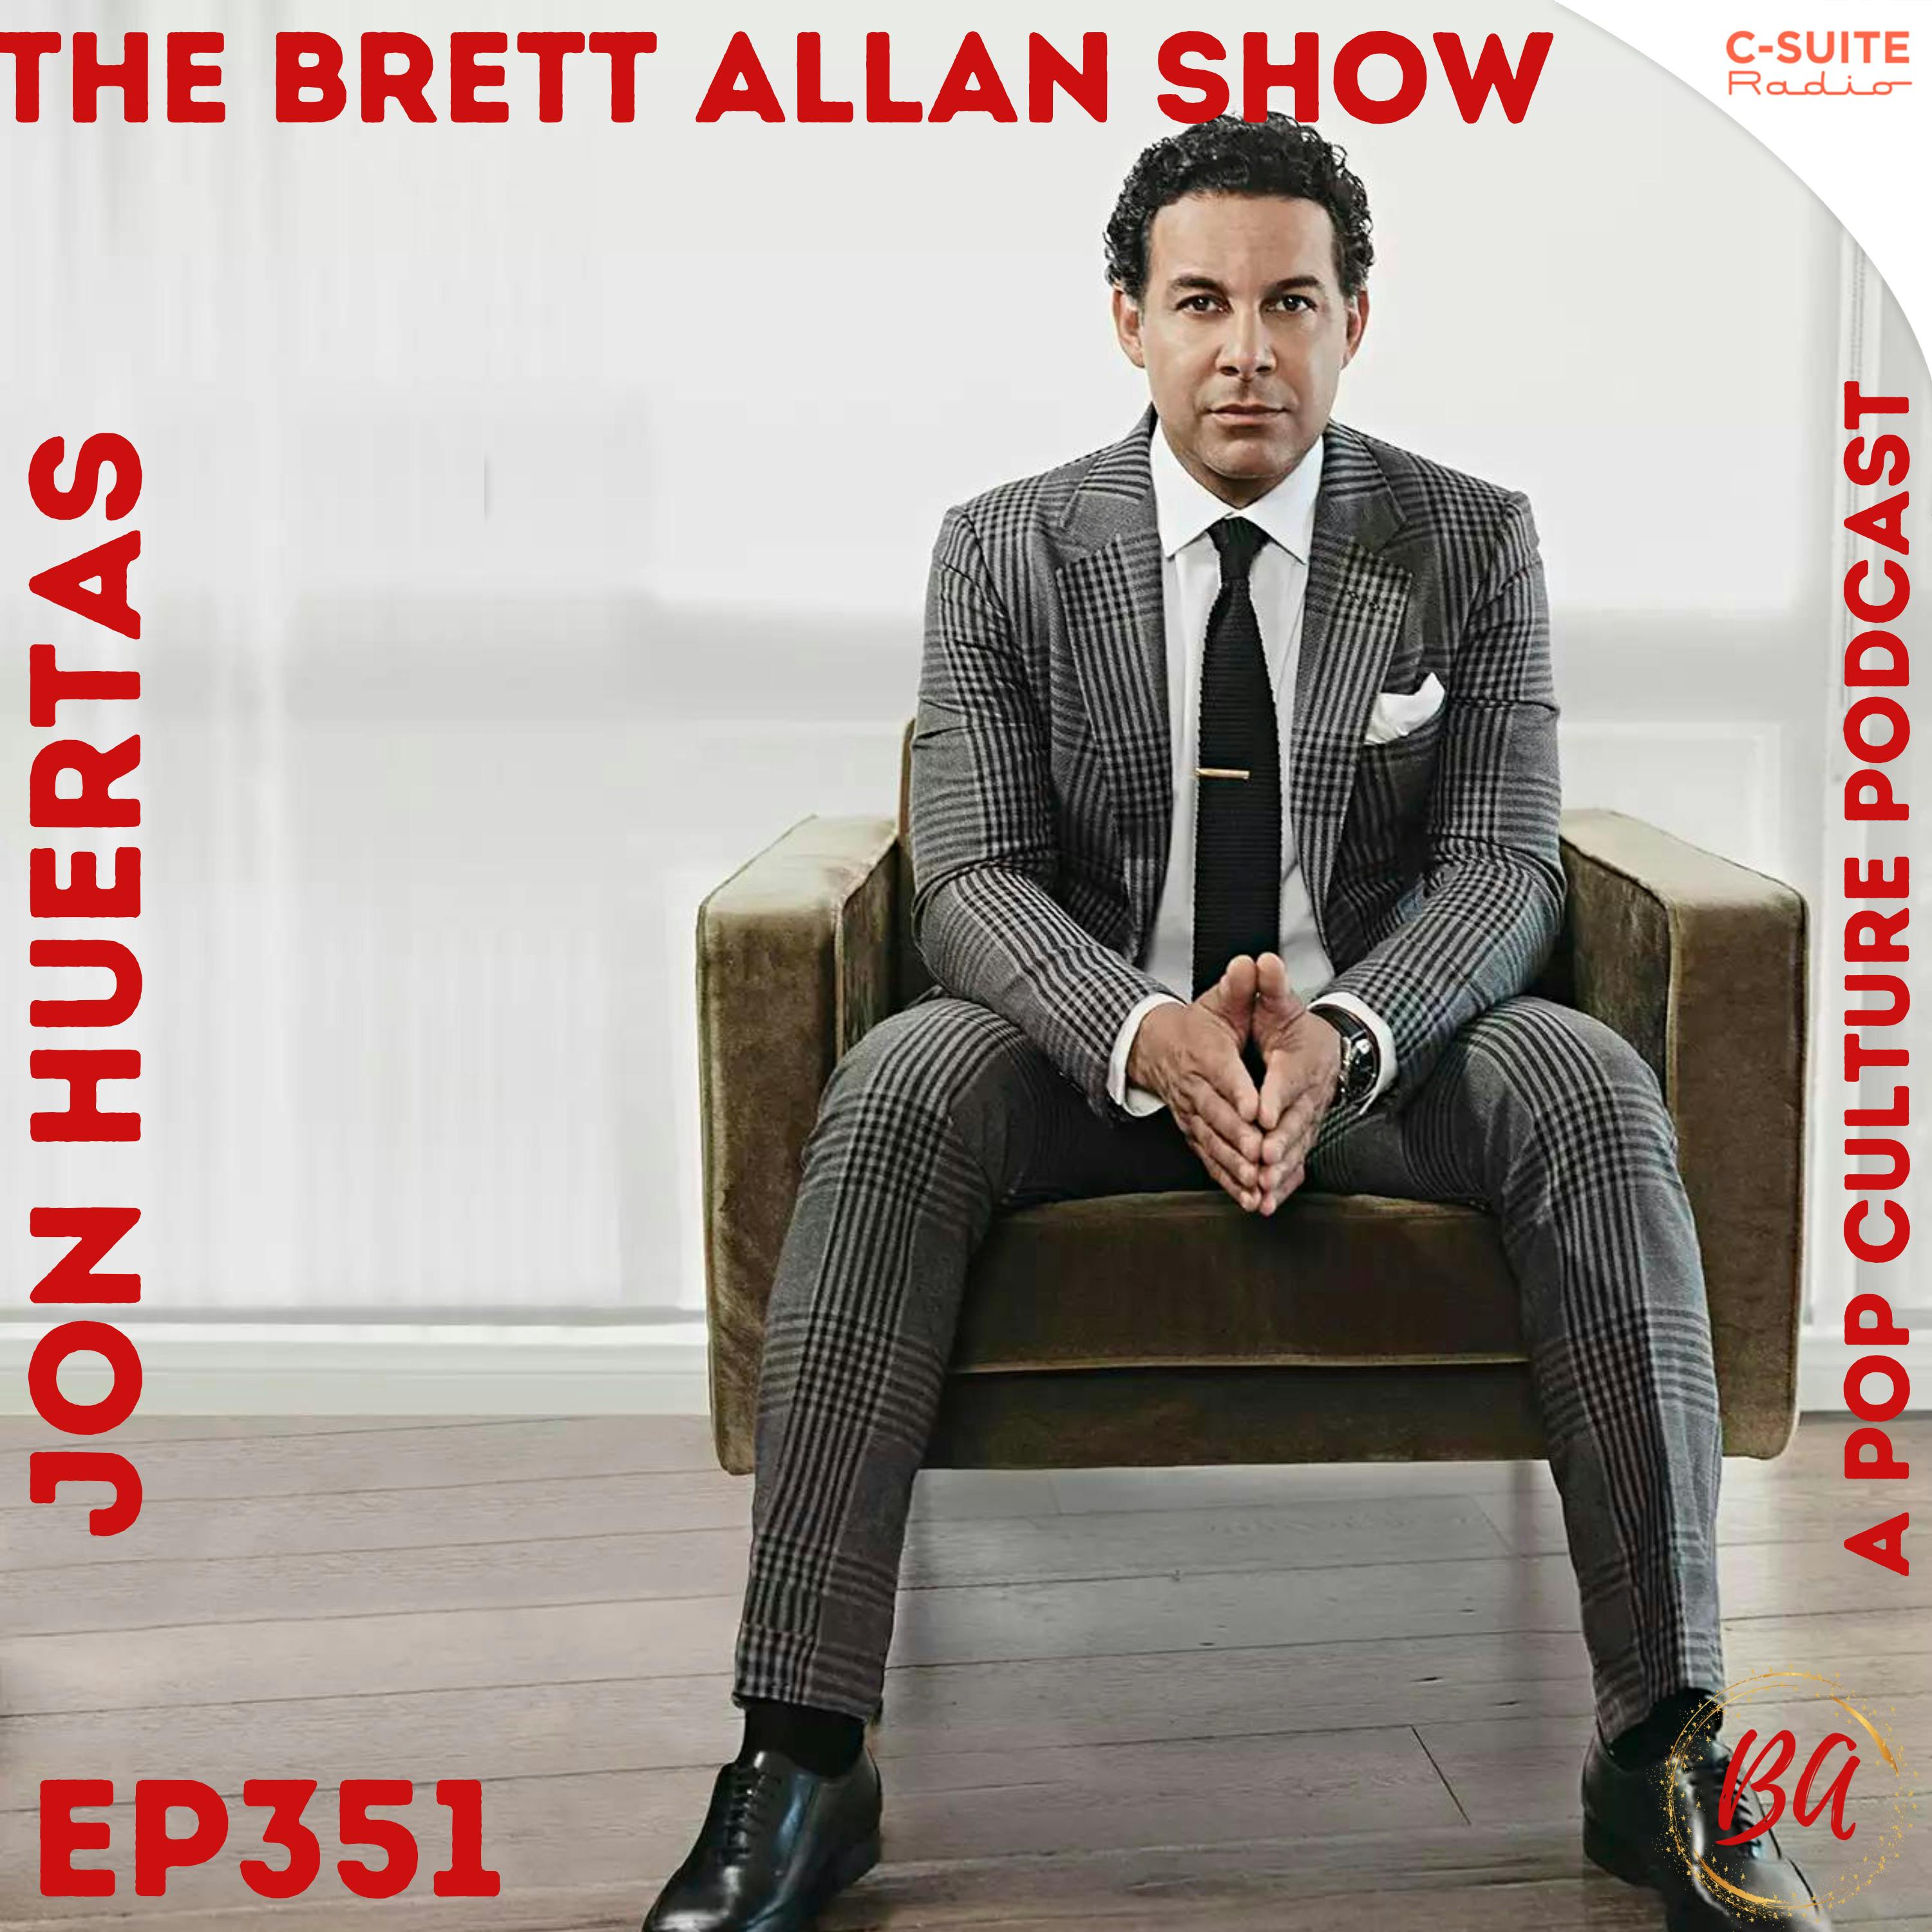 Actor Jon Huertas Joins Brett Allan to Discuss Season 6 of "This is Us" and "Miguel's" BIG Episode | THE END Image